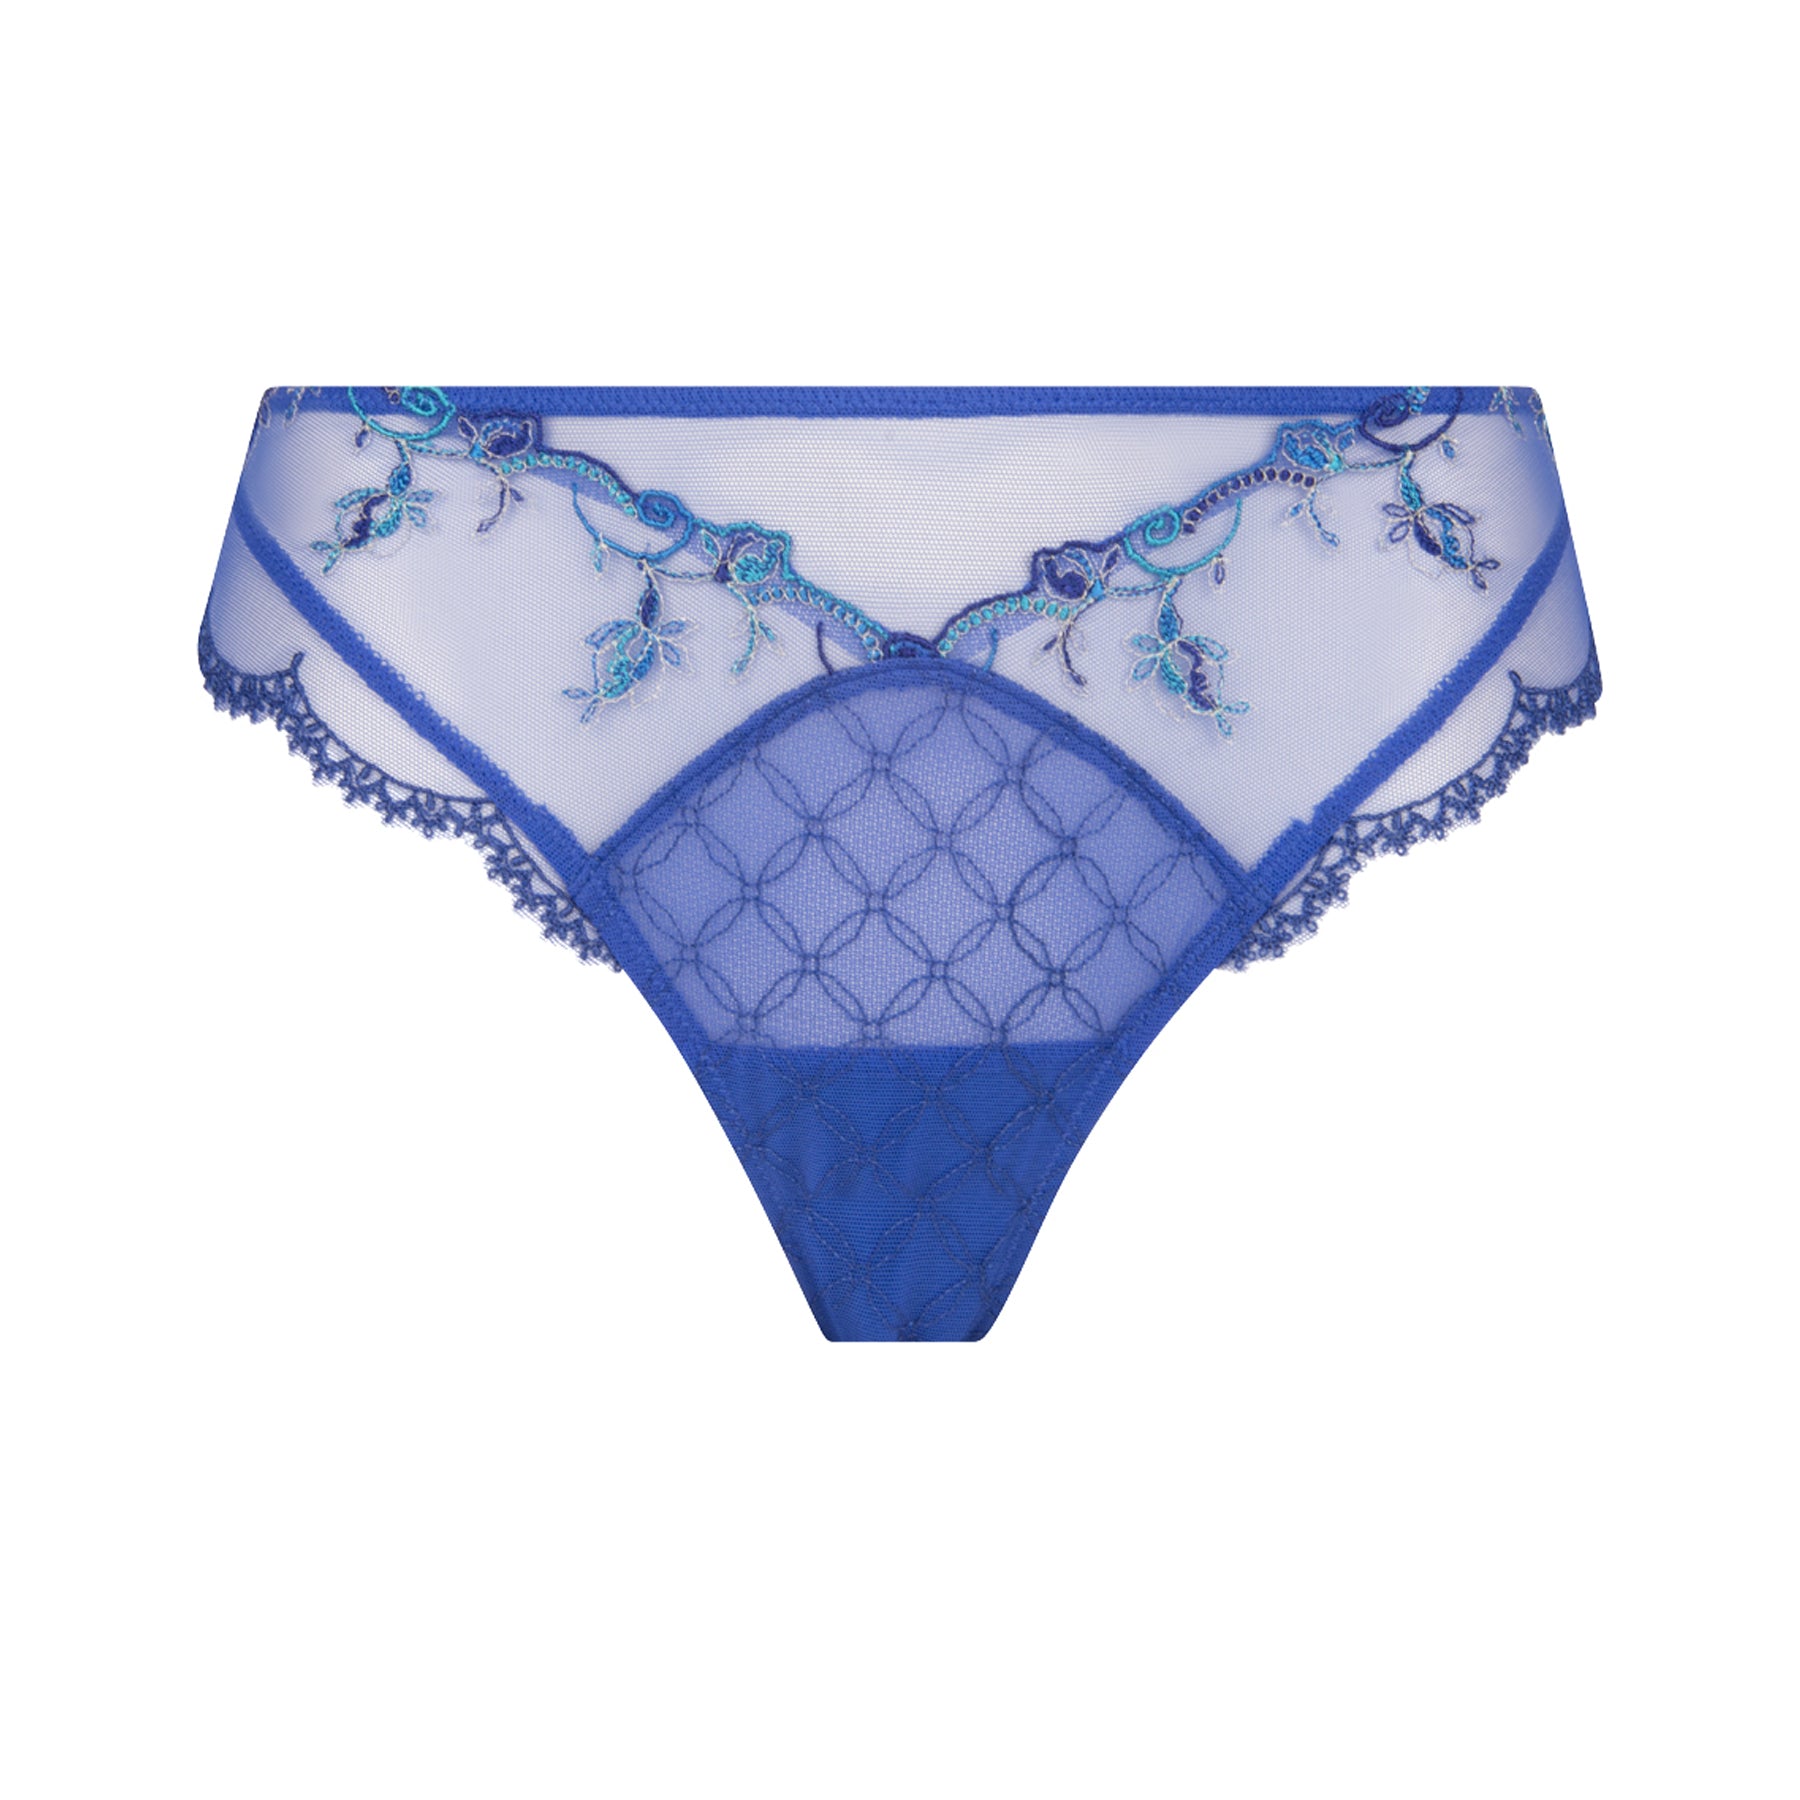 Hyper Real Metallic Lace Strappy G-String in Blue